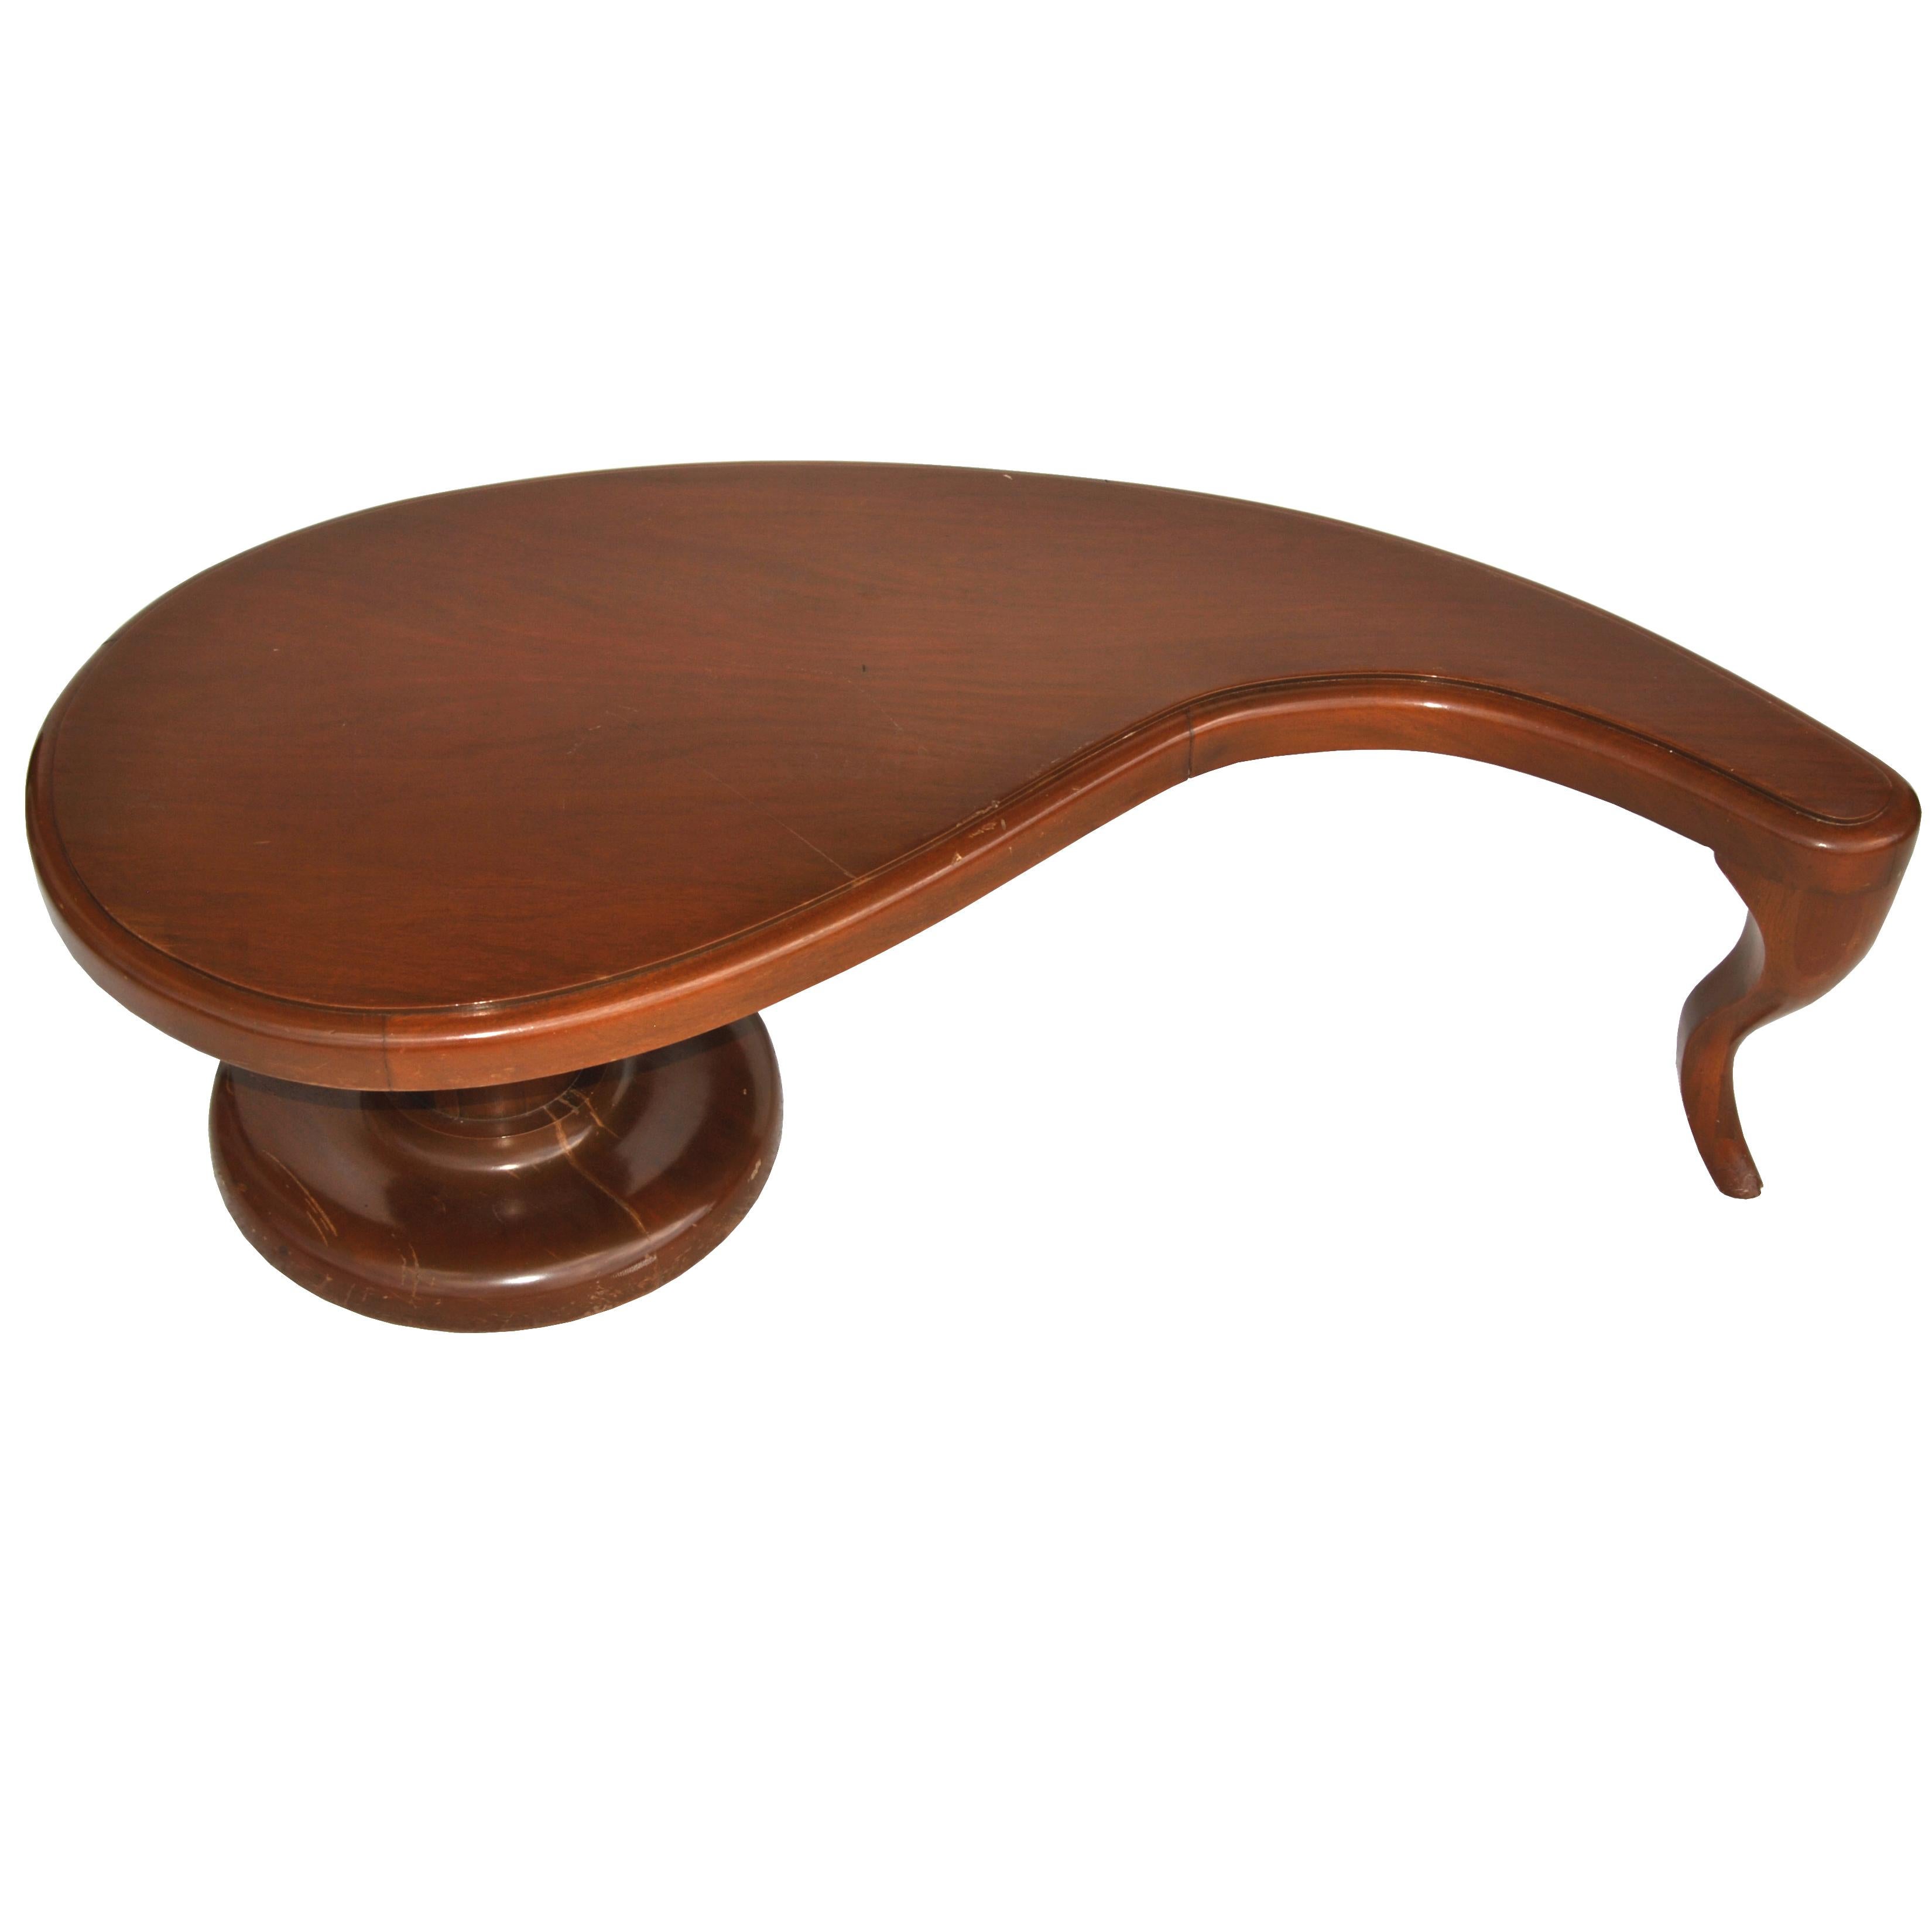 Neoclassical style coffee table in the manner of John Tavis,
1950s
 

An interesting design featuring an organic shaped top paired with a classical pedestal and sabre leg in a rich mahogany.